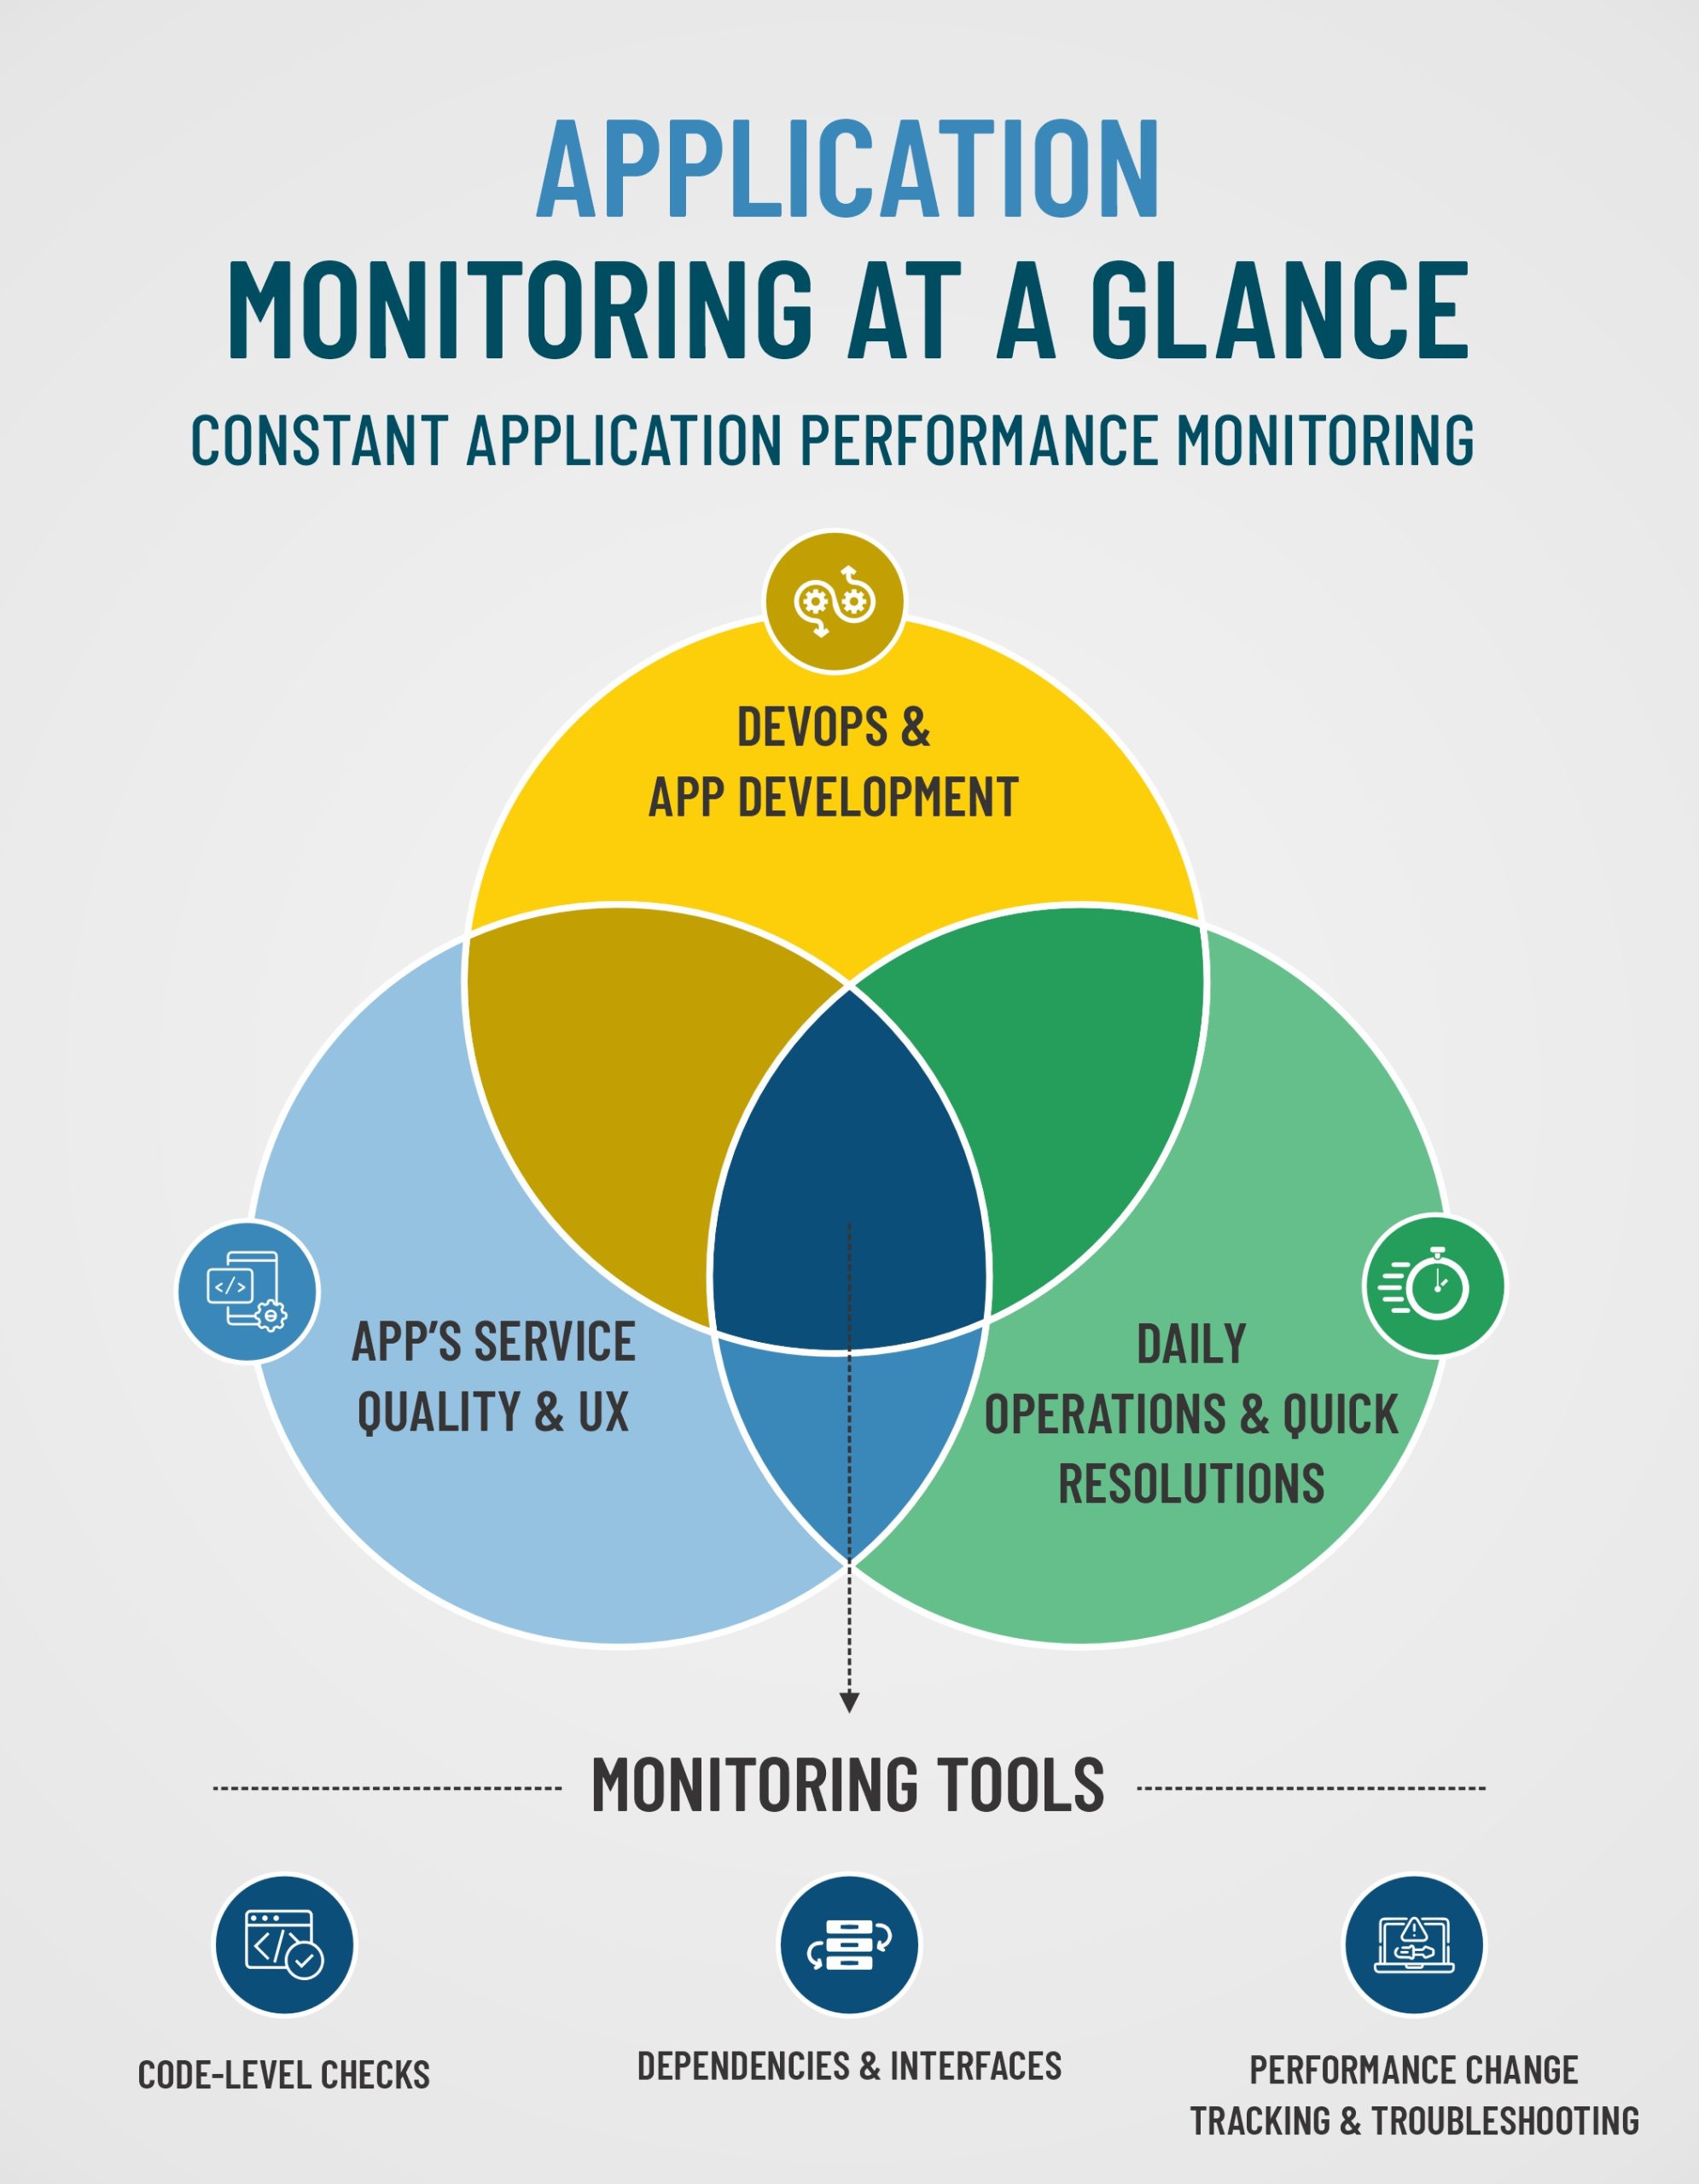 Constant Application Performance Monitoring